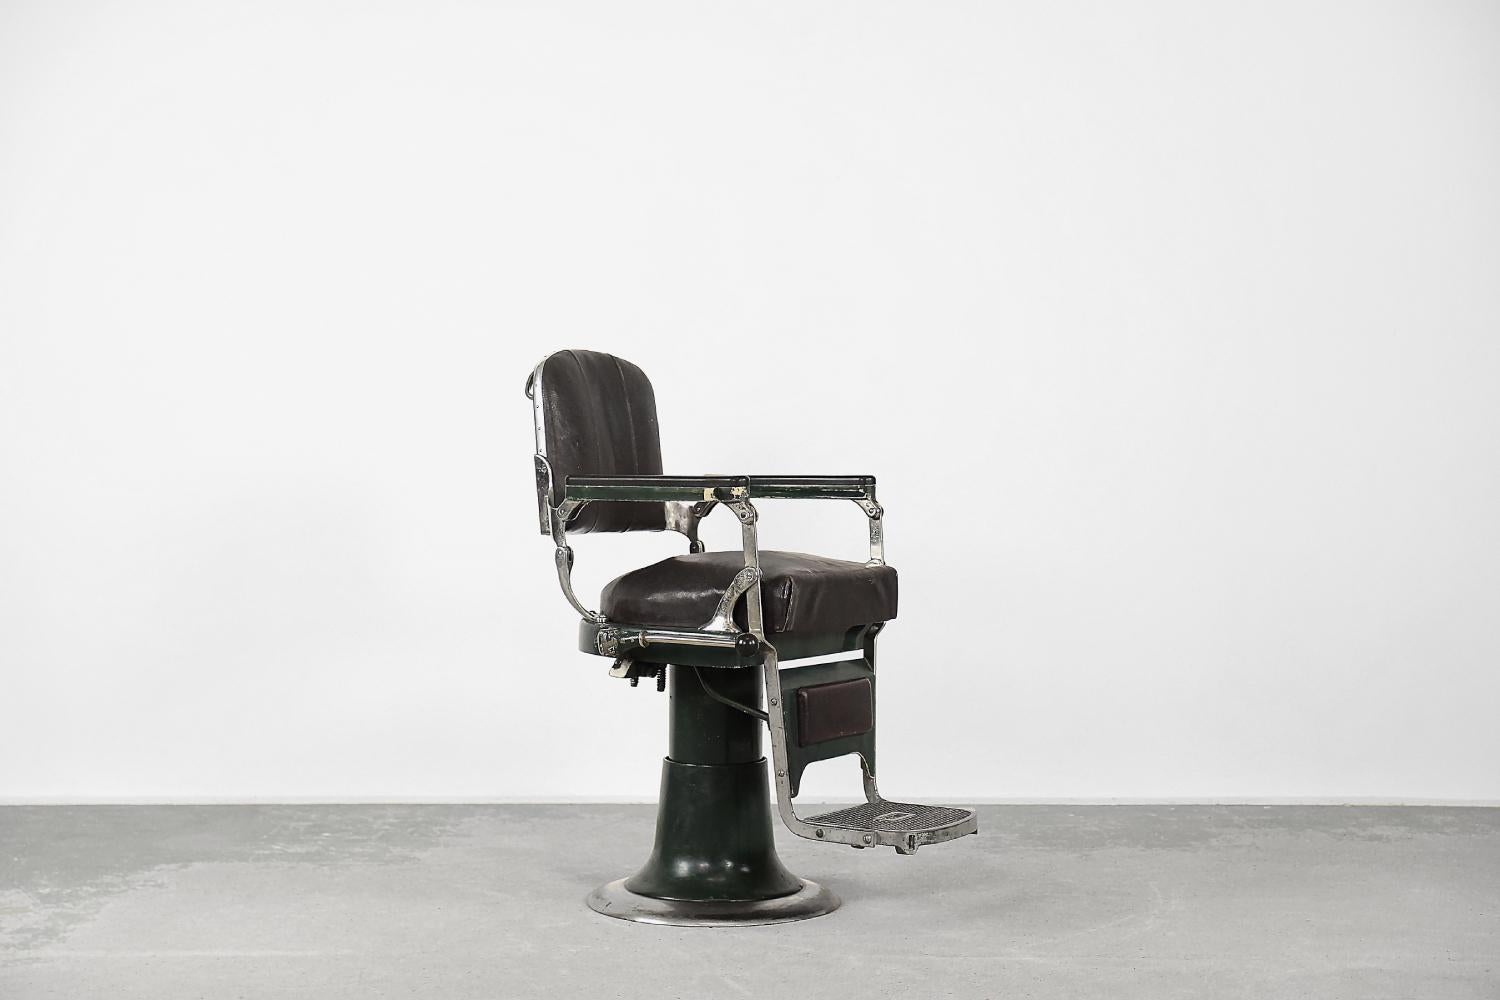 This antique barber chair was manufactured by the Swedish manufacture NIKE in 1927. The seat is swiveling and is raised with a double clutch and lowered with an oil level control. It uses hydraulic pressure to adjust the height of the mechanism. All